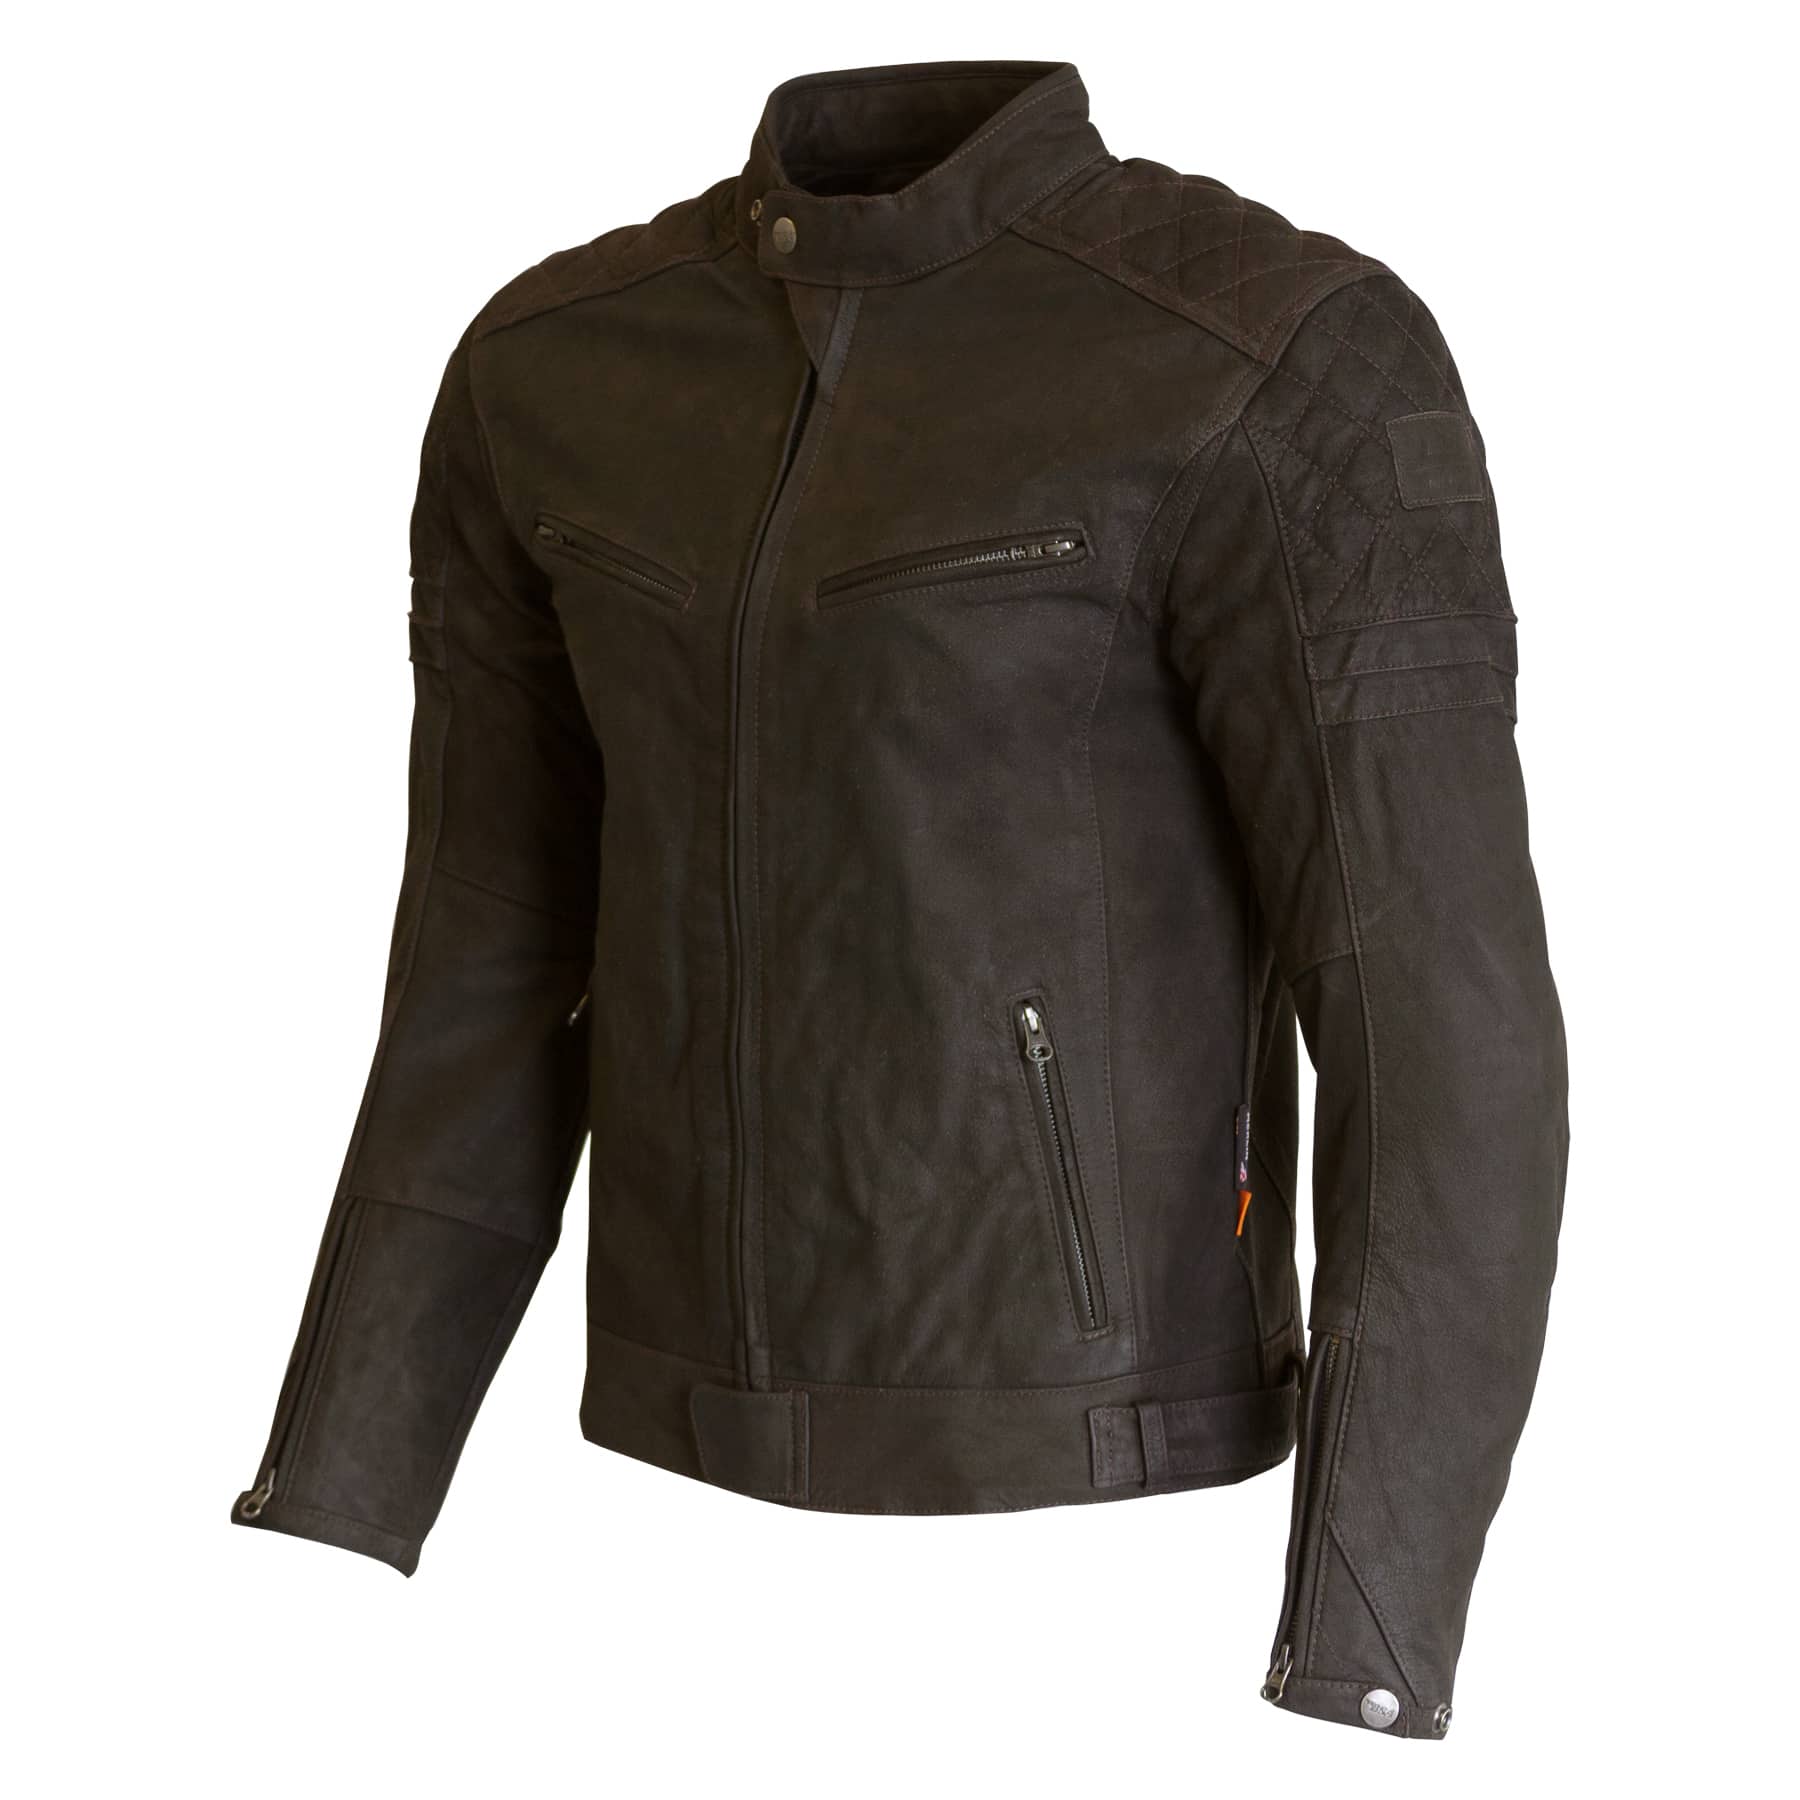 BSA Liberation Leather Jacket in brown